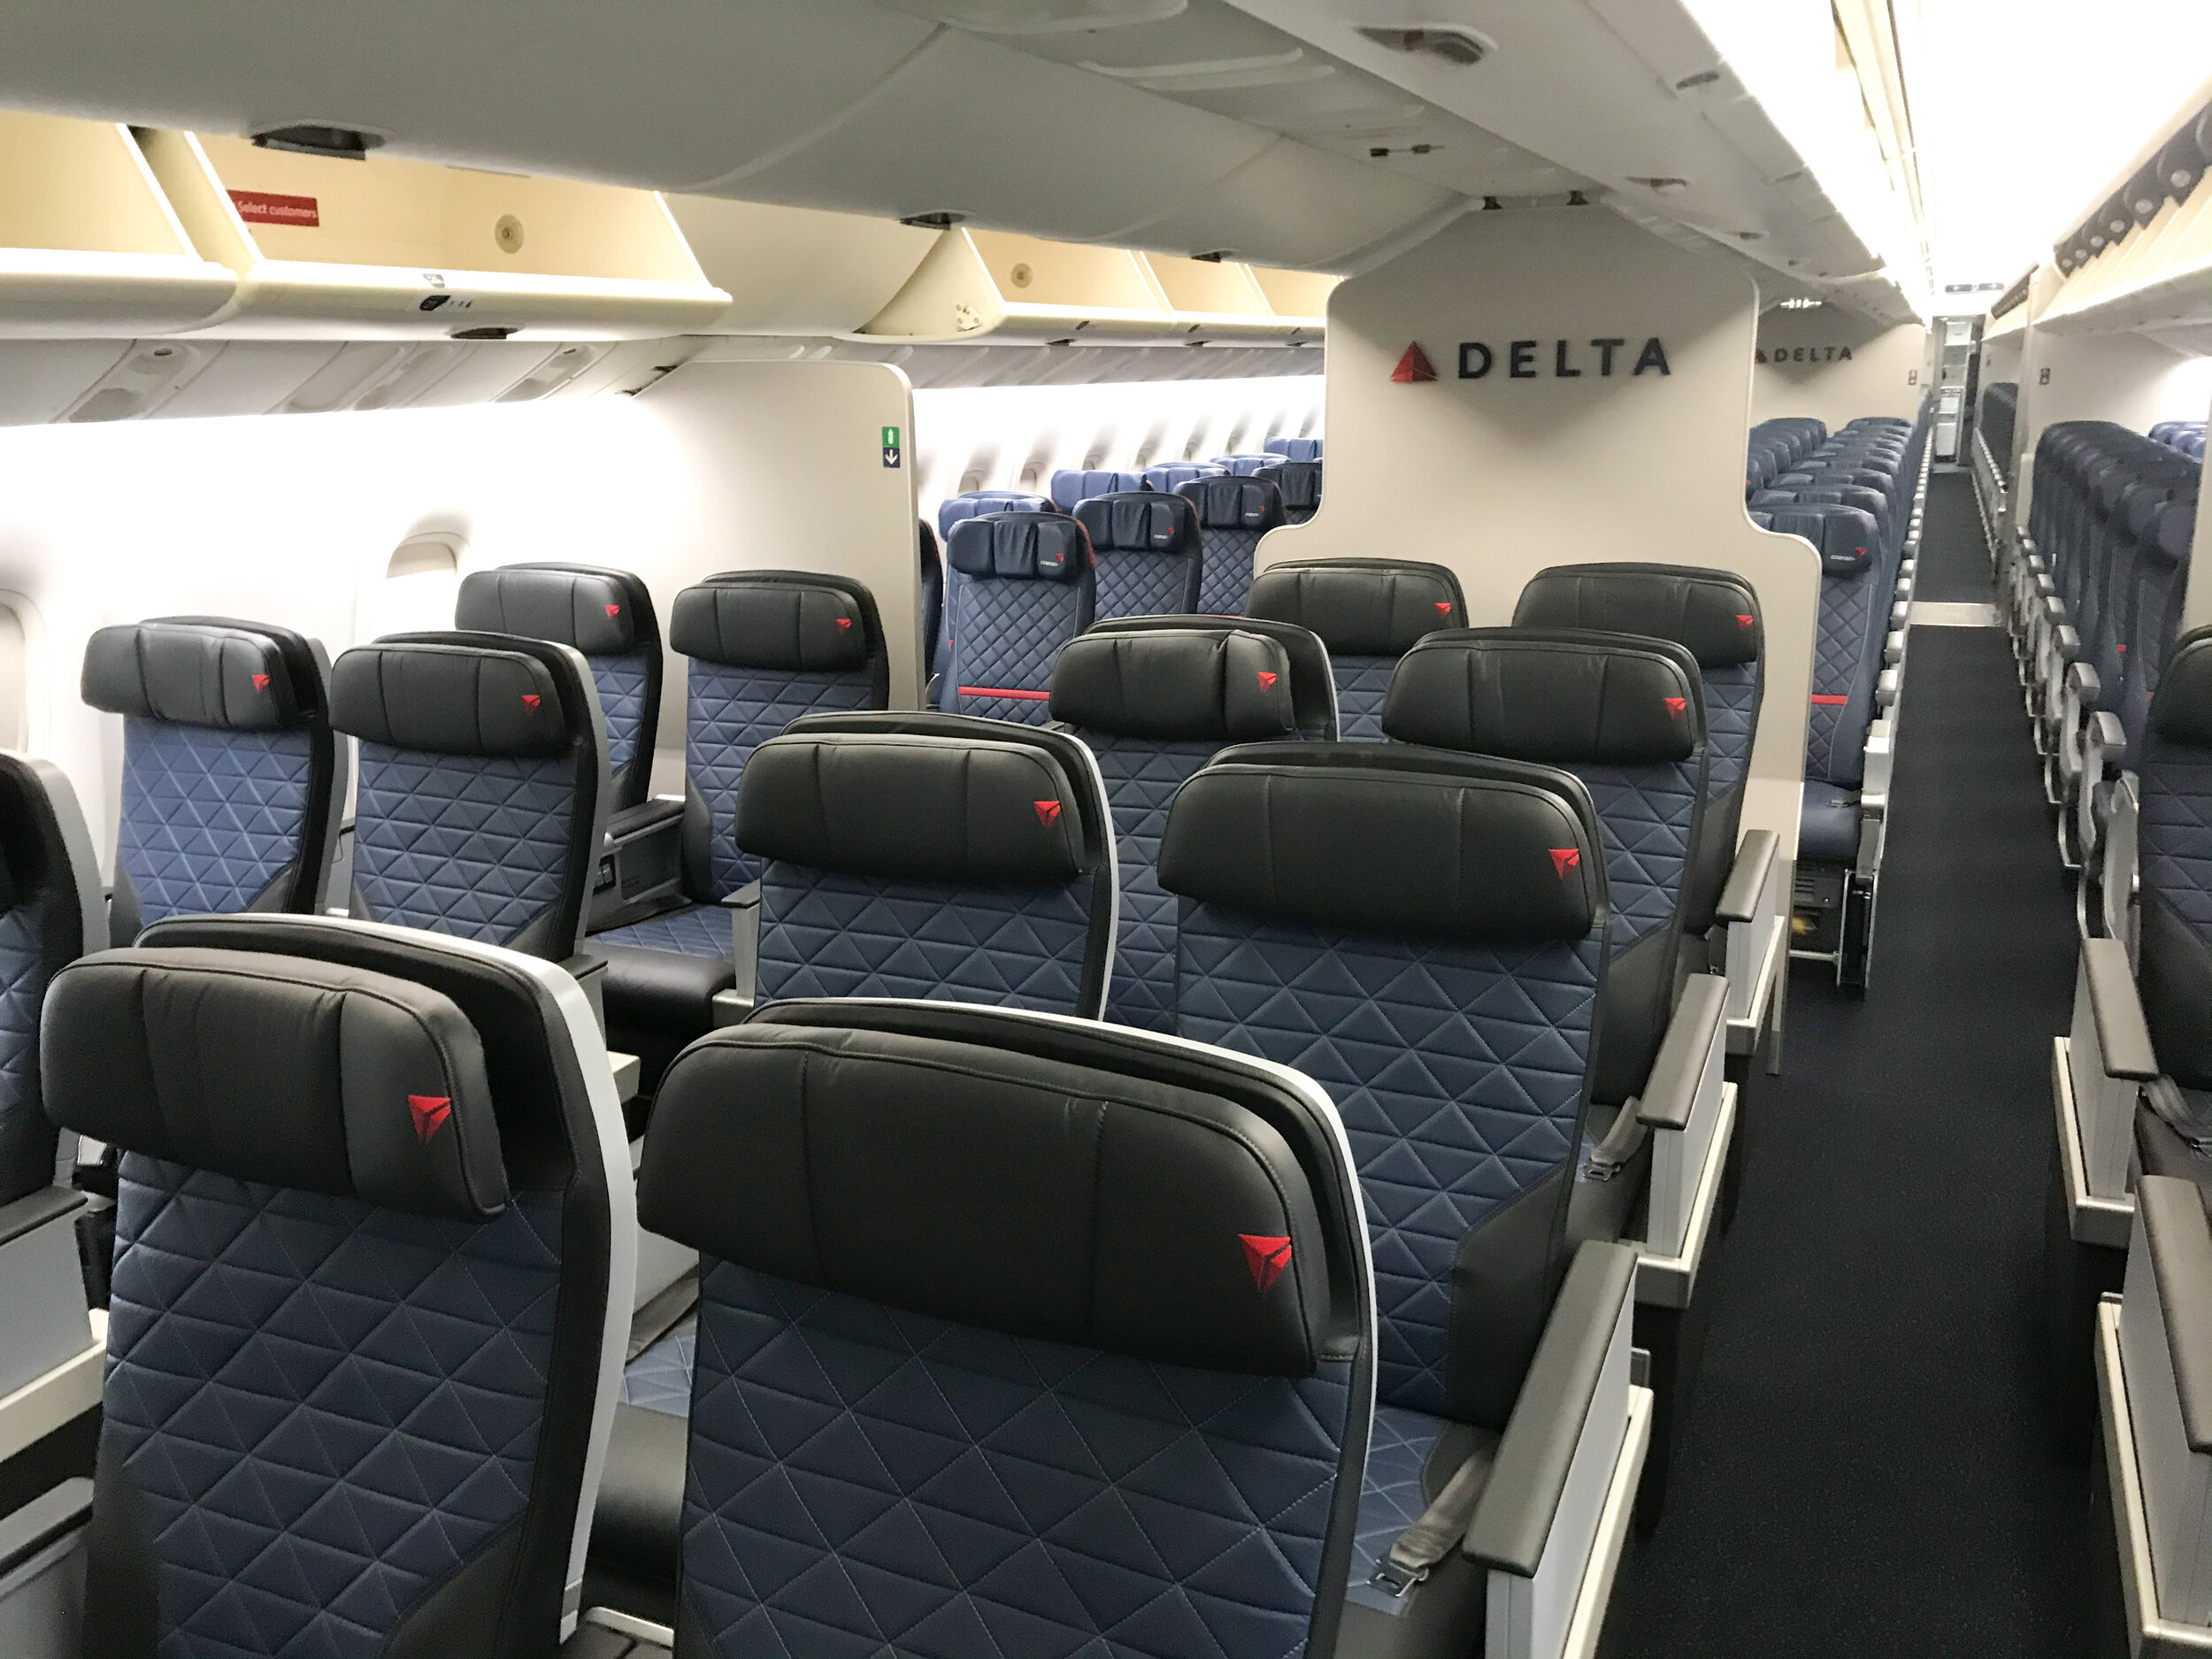 Trip Report: 767-400 Delta Premium Select, The New Slc, And A220 First  Class — Officer Wayfinder